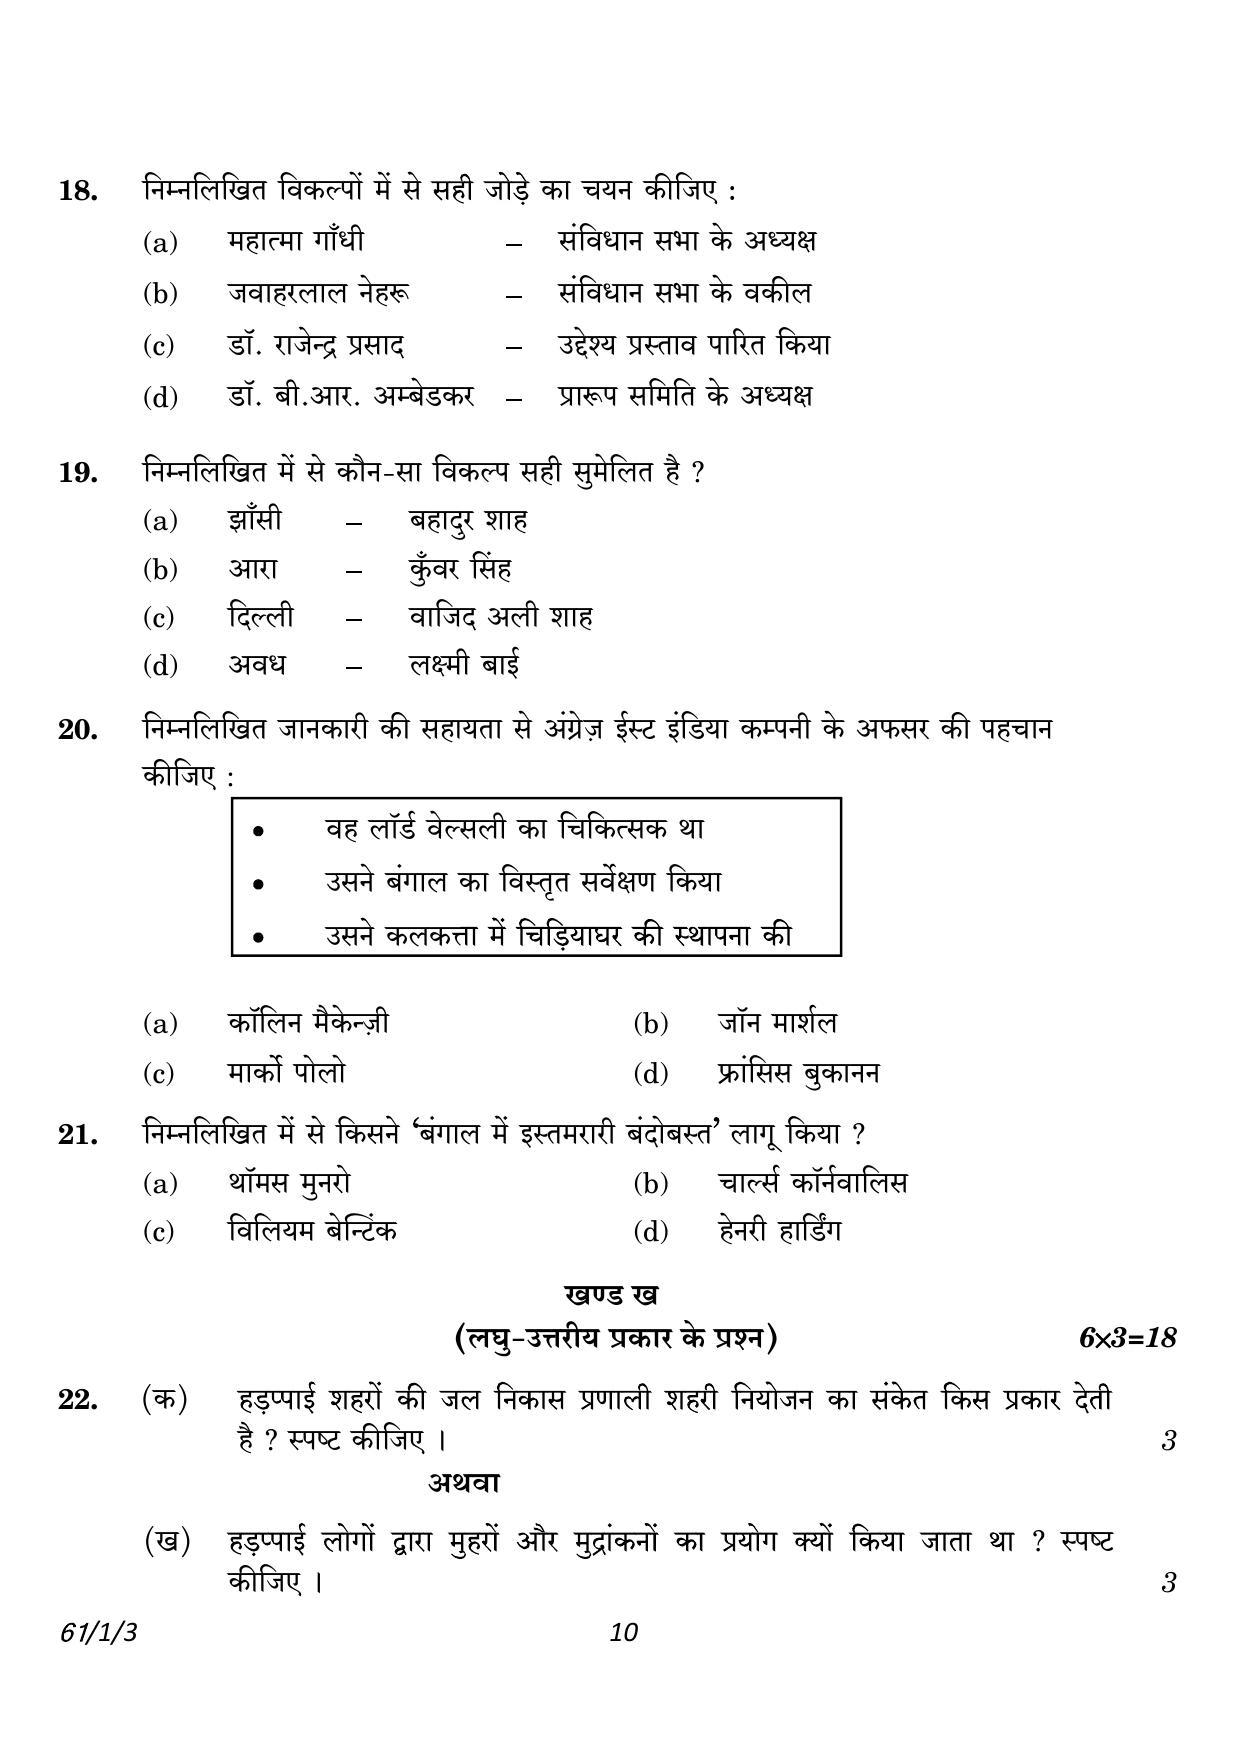 CBSE Class 12 61-1-3 History 2023 Question Paper - Page 10